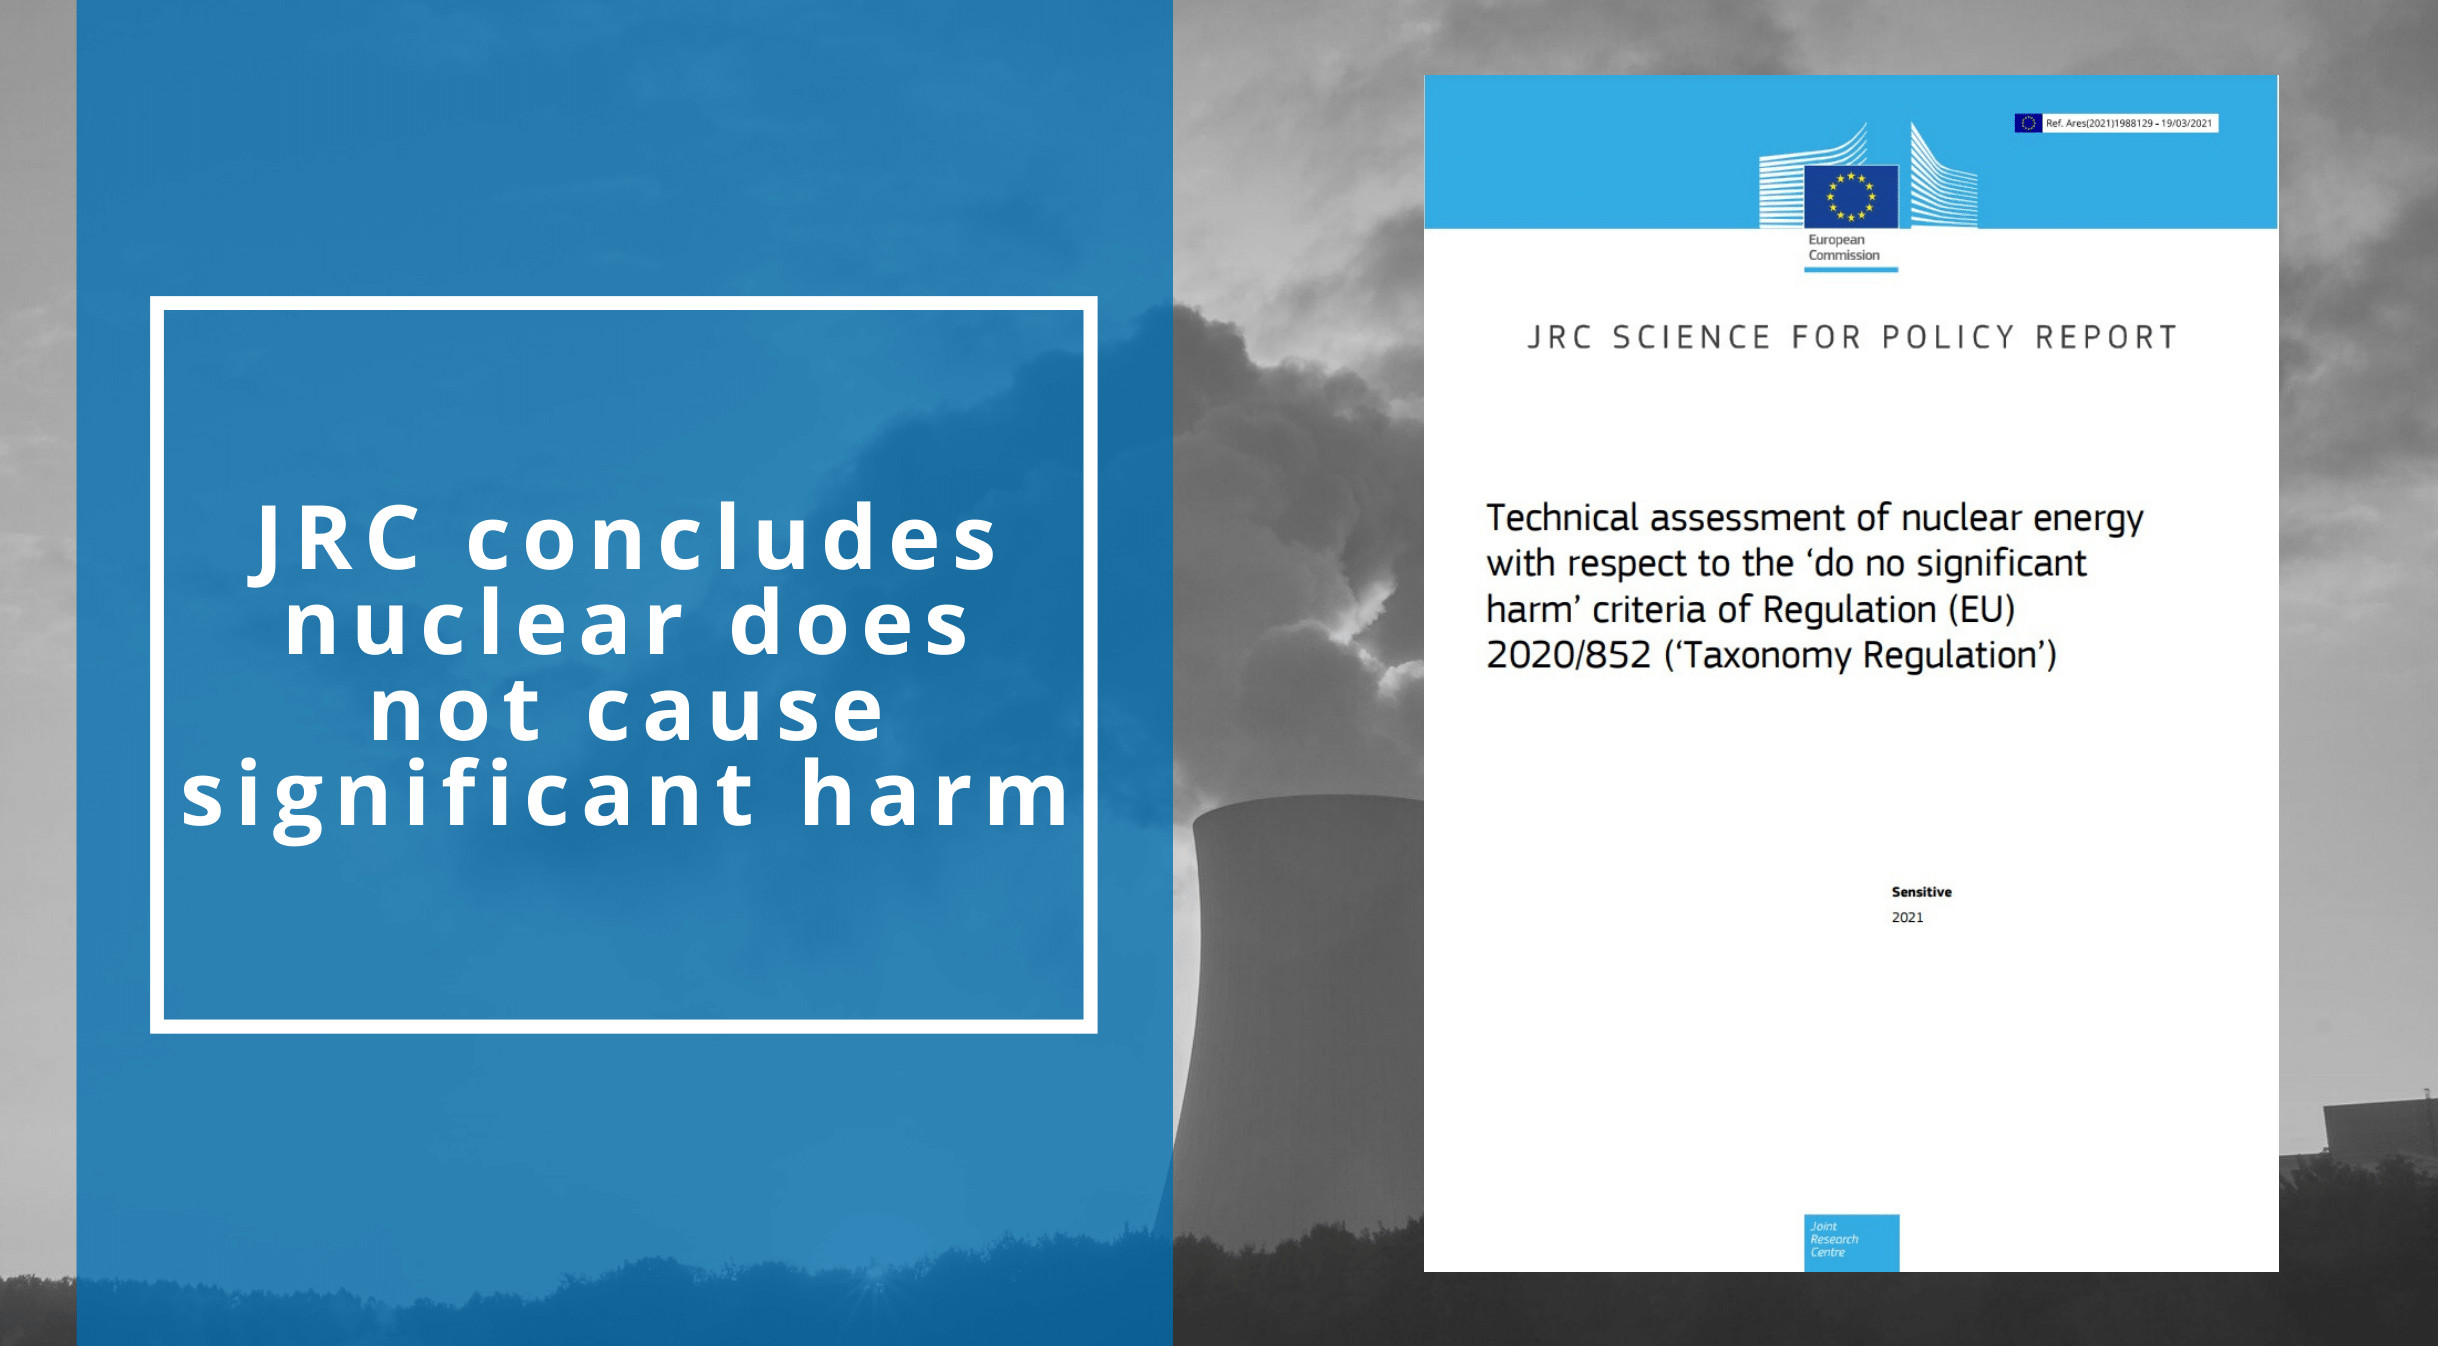 In March 2021 the Joint Research Centre (JRC) published the technical assessment of nuclear energy with respect to the ‘do no significant harm&#